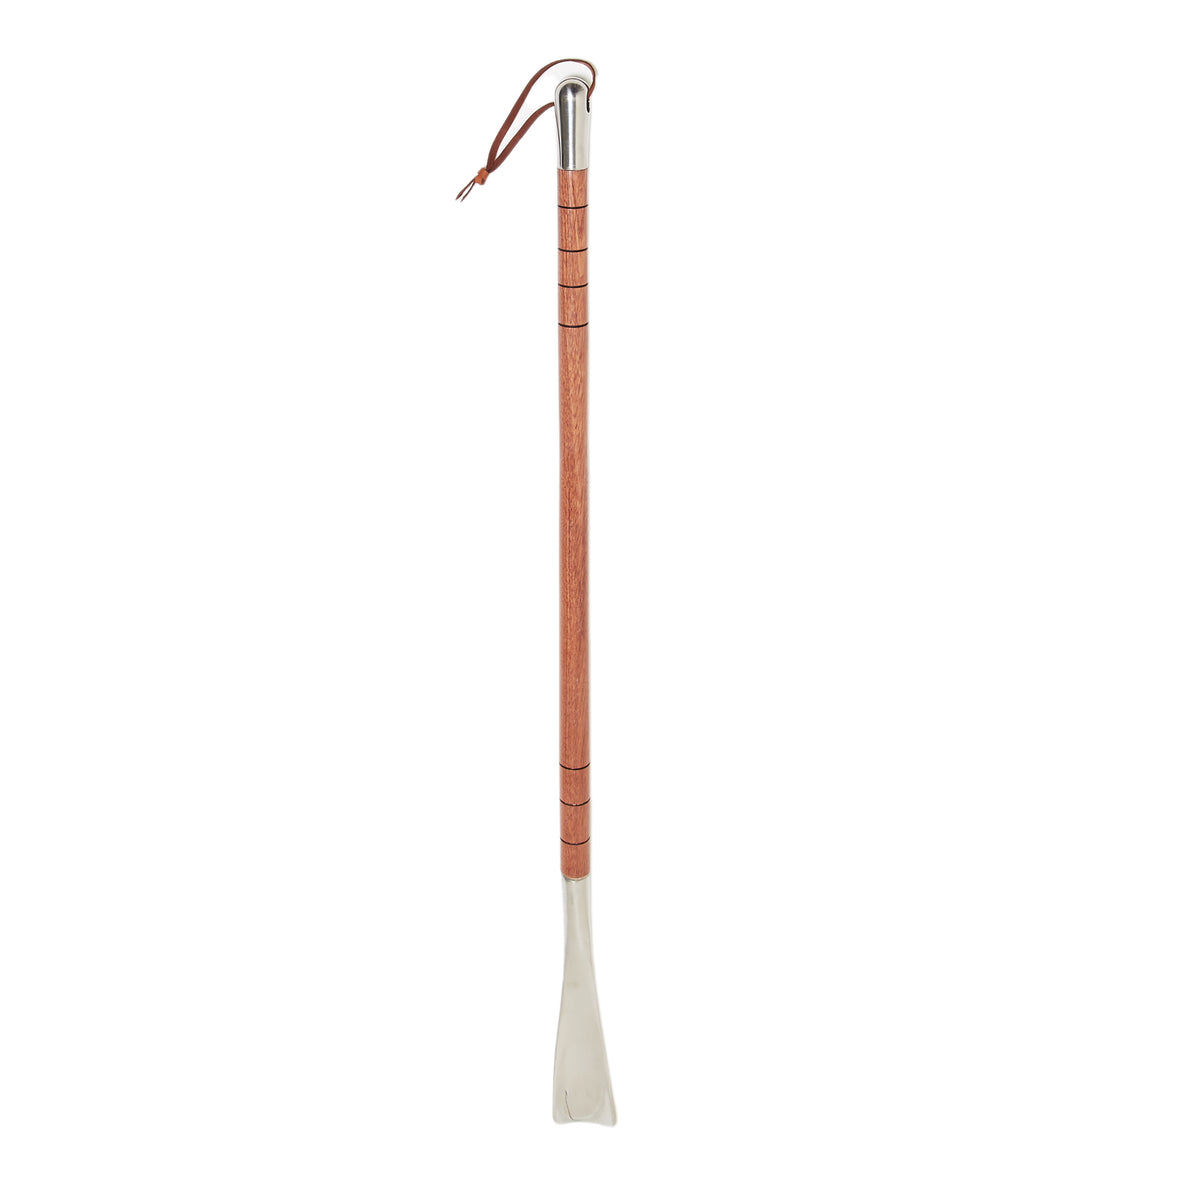 A Hanger Project Bubinga Full-Length Shoe Horn with a hardwood handle on a white background.